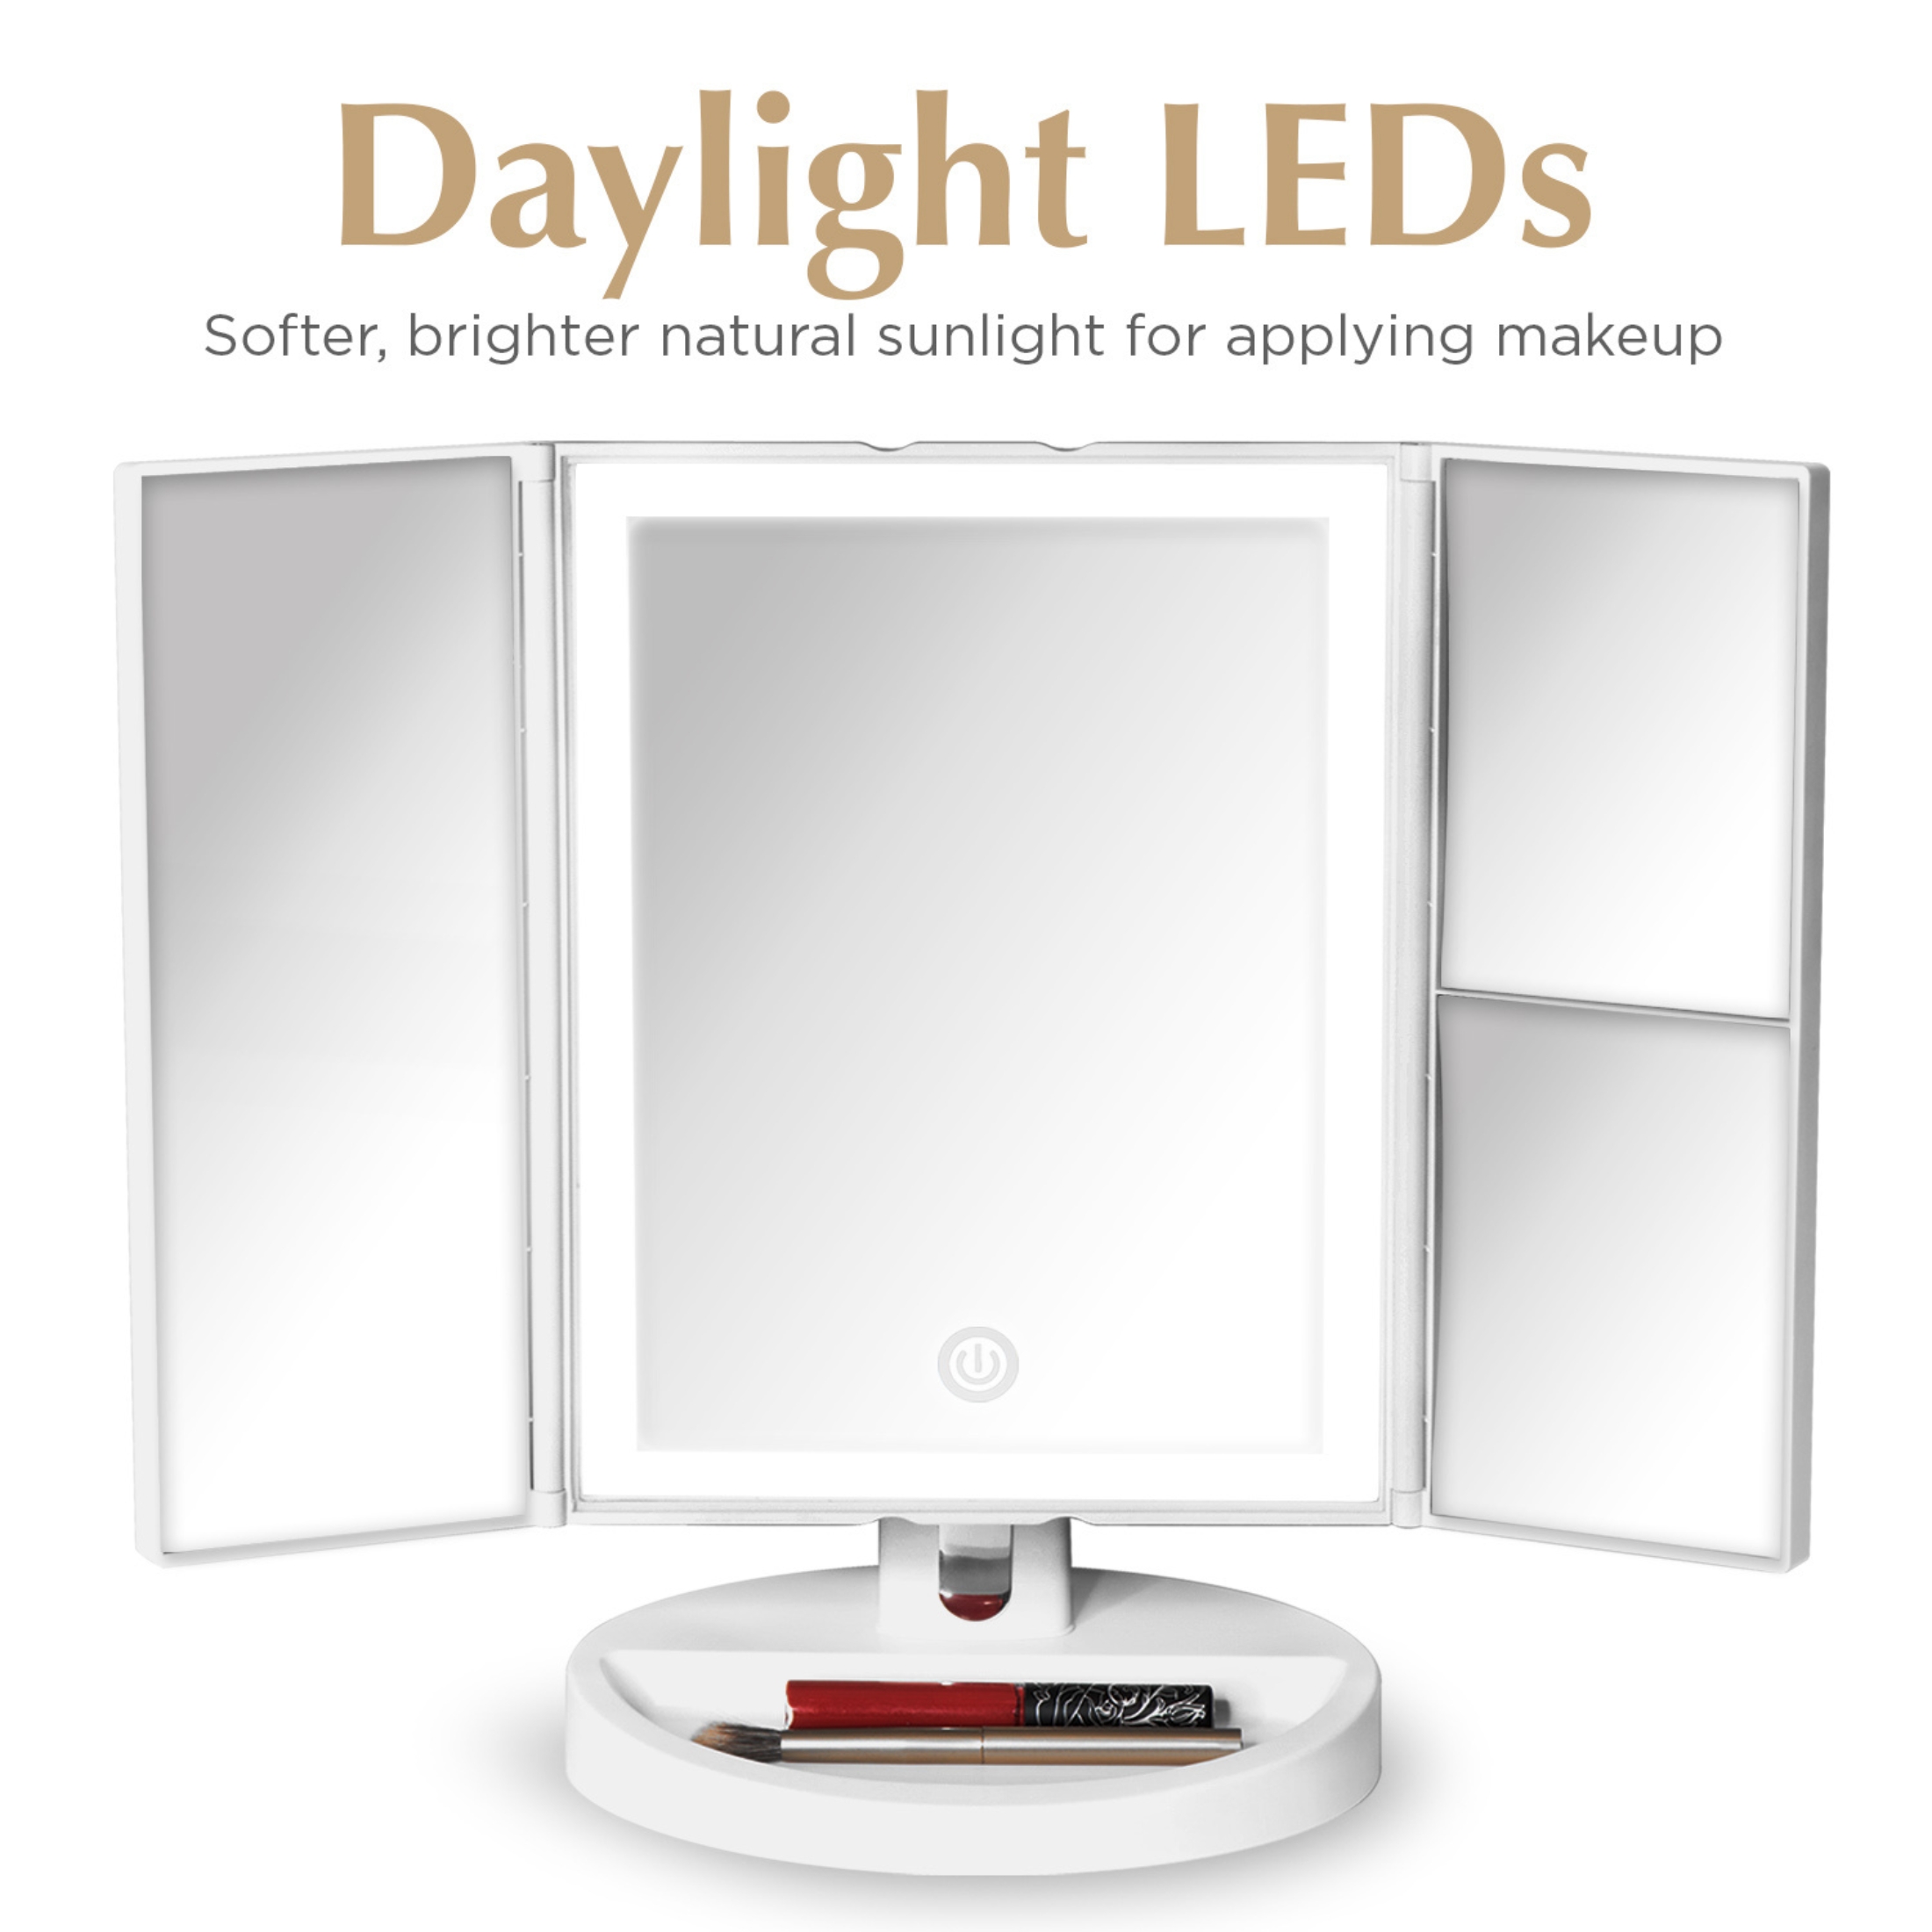 Fancii LED Lighted Vanity Makeup Mirror, Trifold Mirror with 5x and 10x Magnifications - 34 Dimmable Natural Lights, Touch Screen, Best Adjustable Countertop Mirror with Cosmetic Stand (Tria) - image 2 of 7